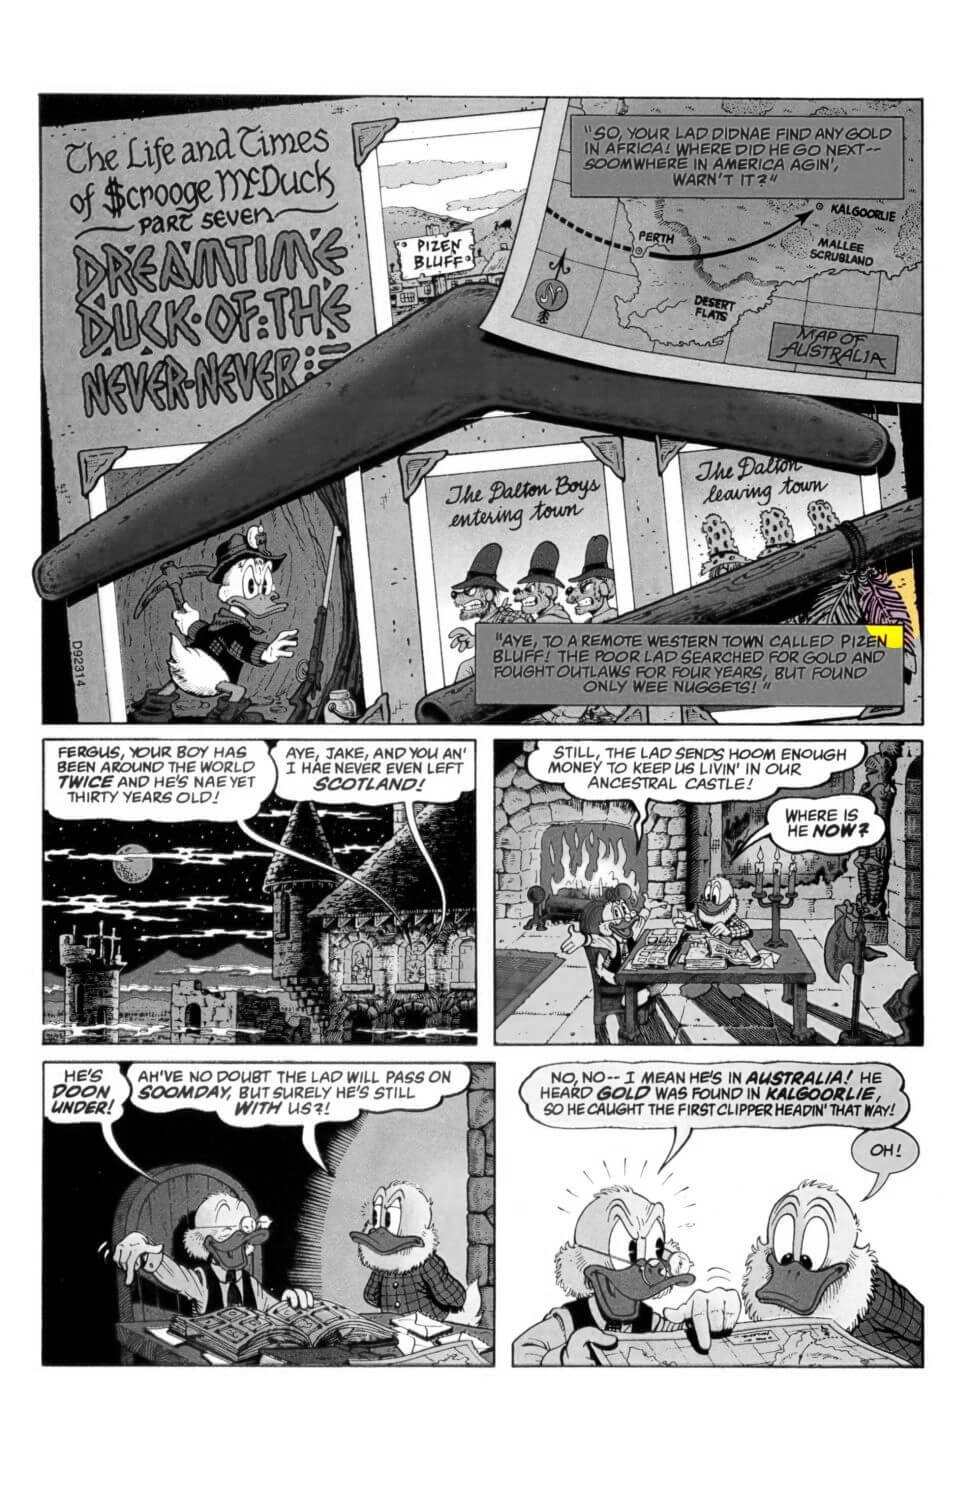 D.U.C.K in Chapter 07 - Dream Time Duck of the Never-Never first page